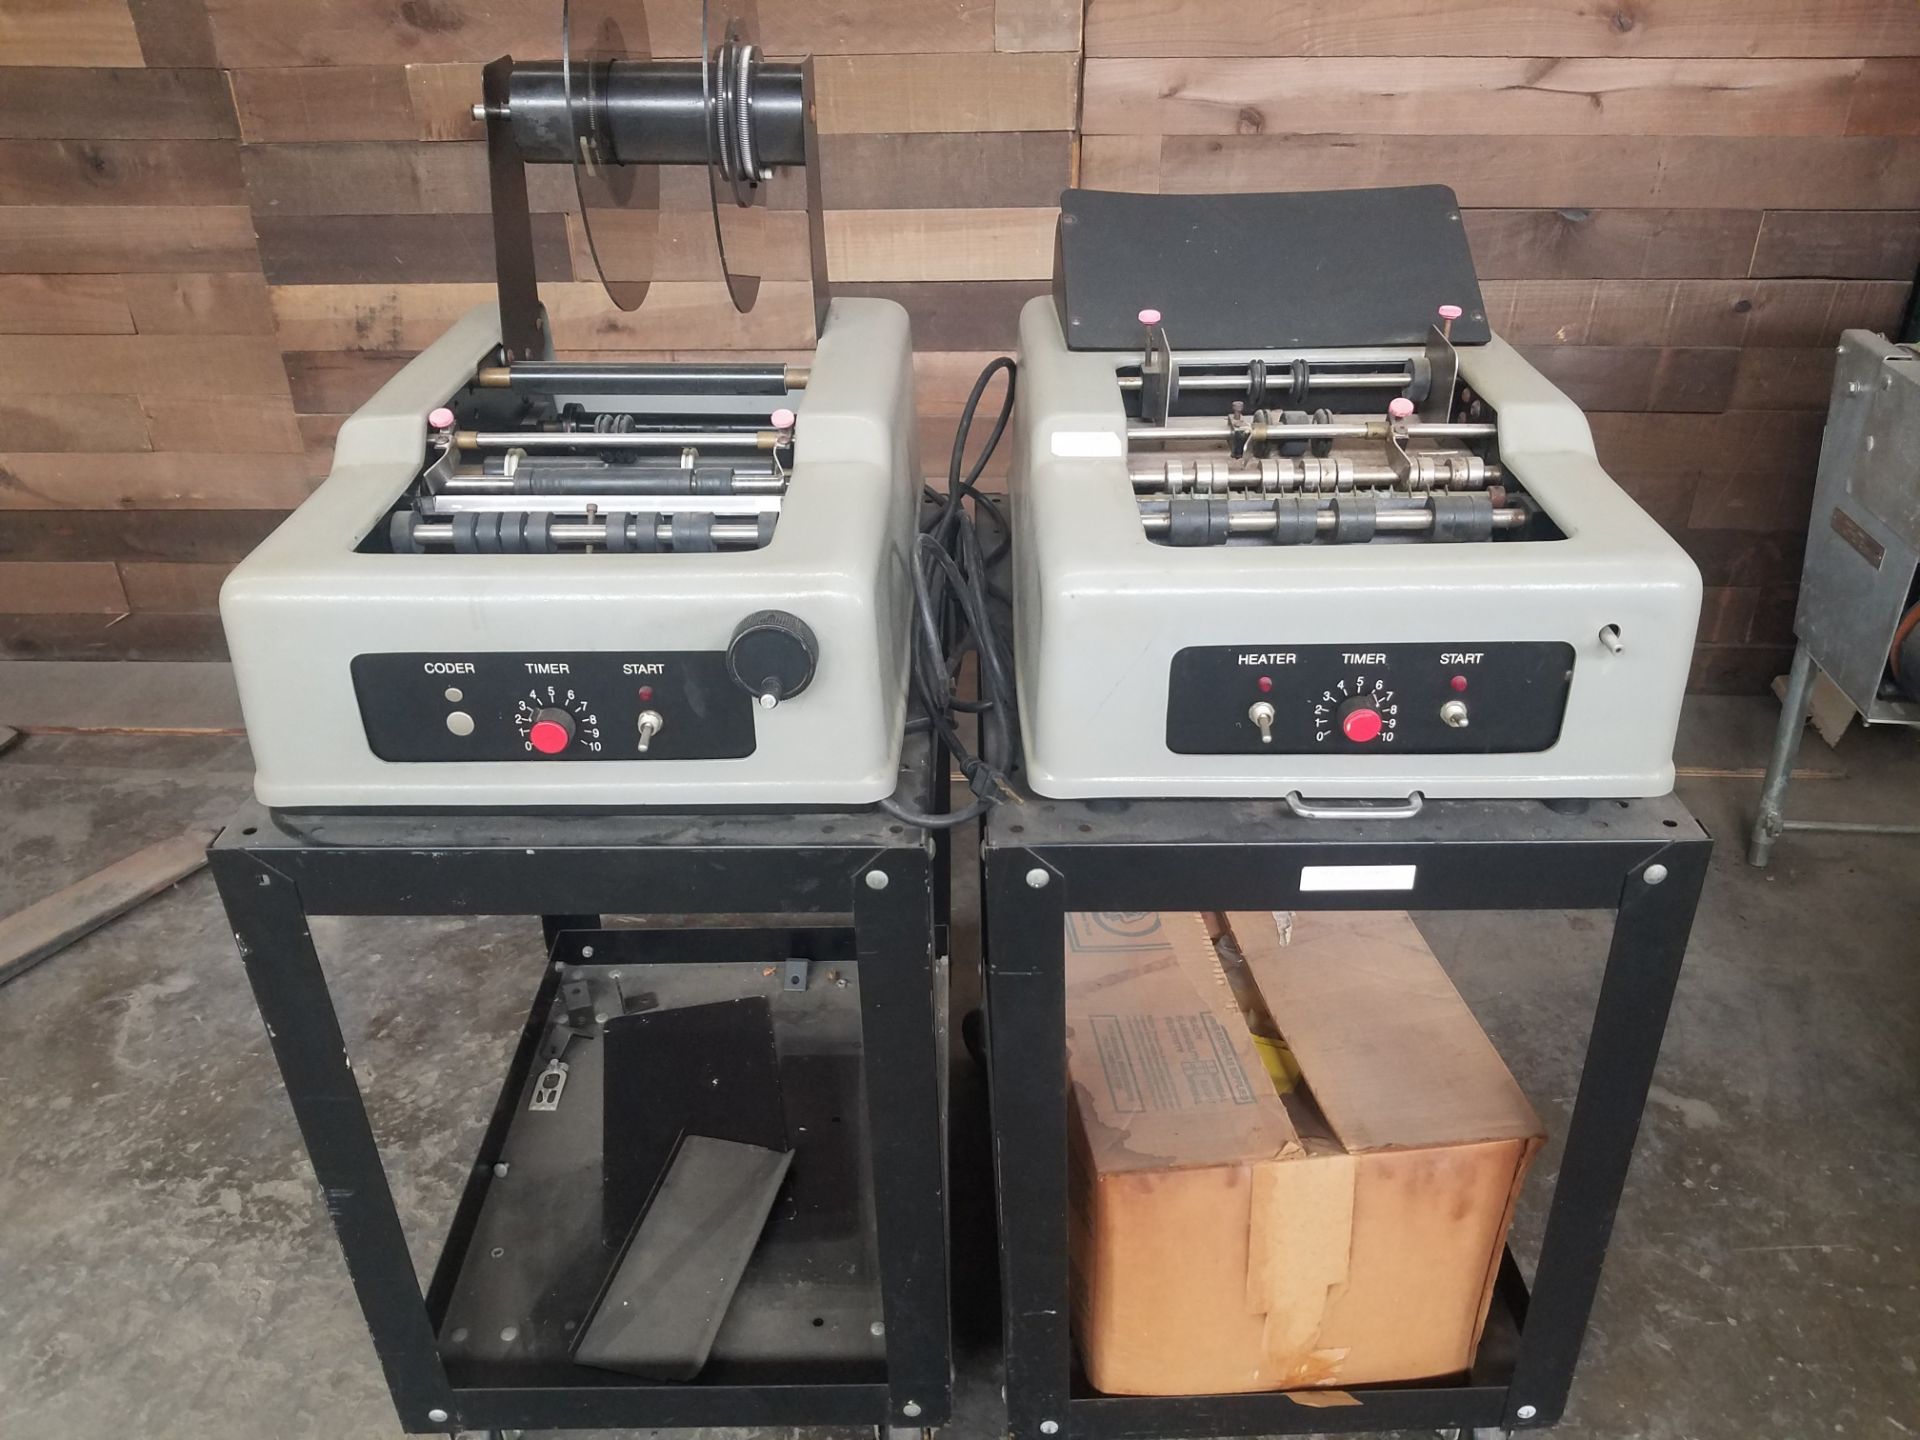 Advent 300 Bottle Labeler and Glue Machine, S/N 2225, Volt 110 (Loading Fee $100) (Located Fort